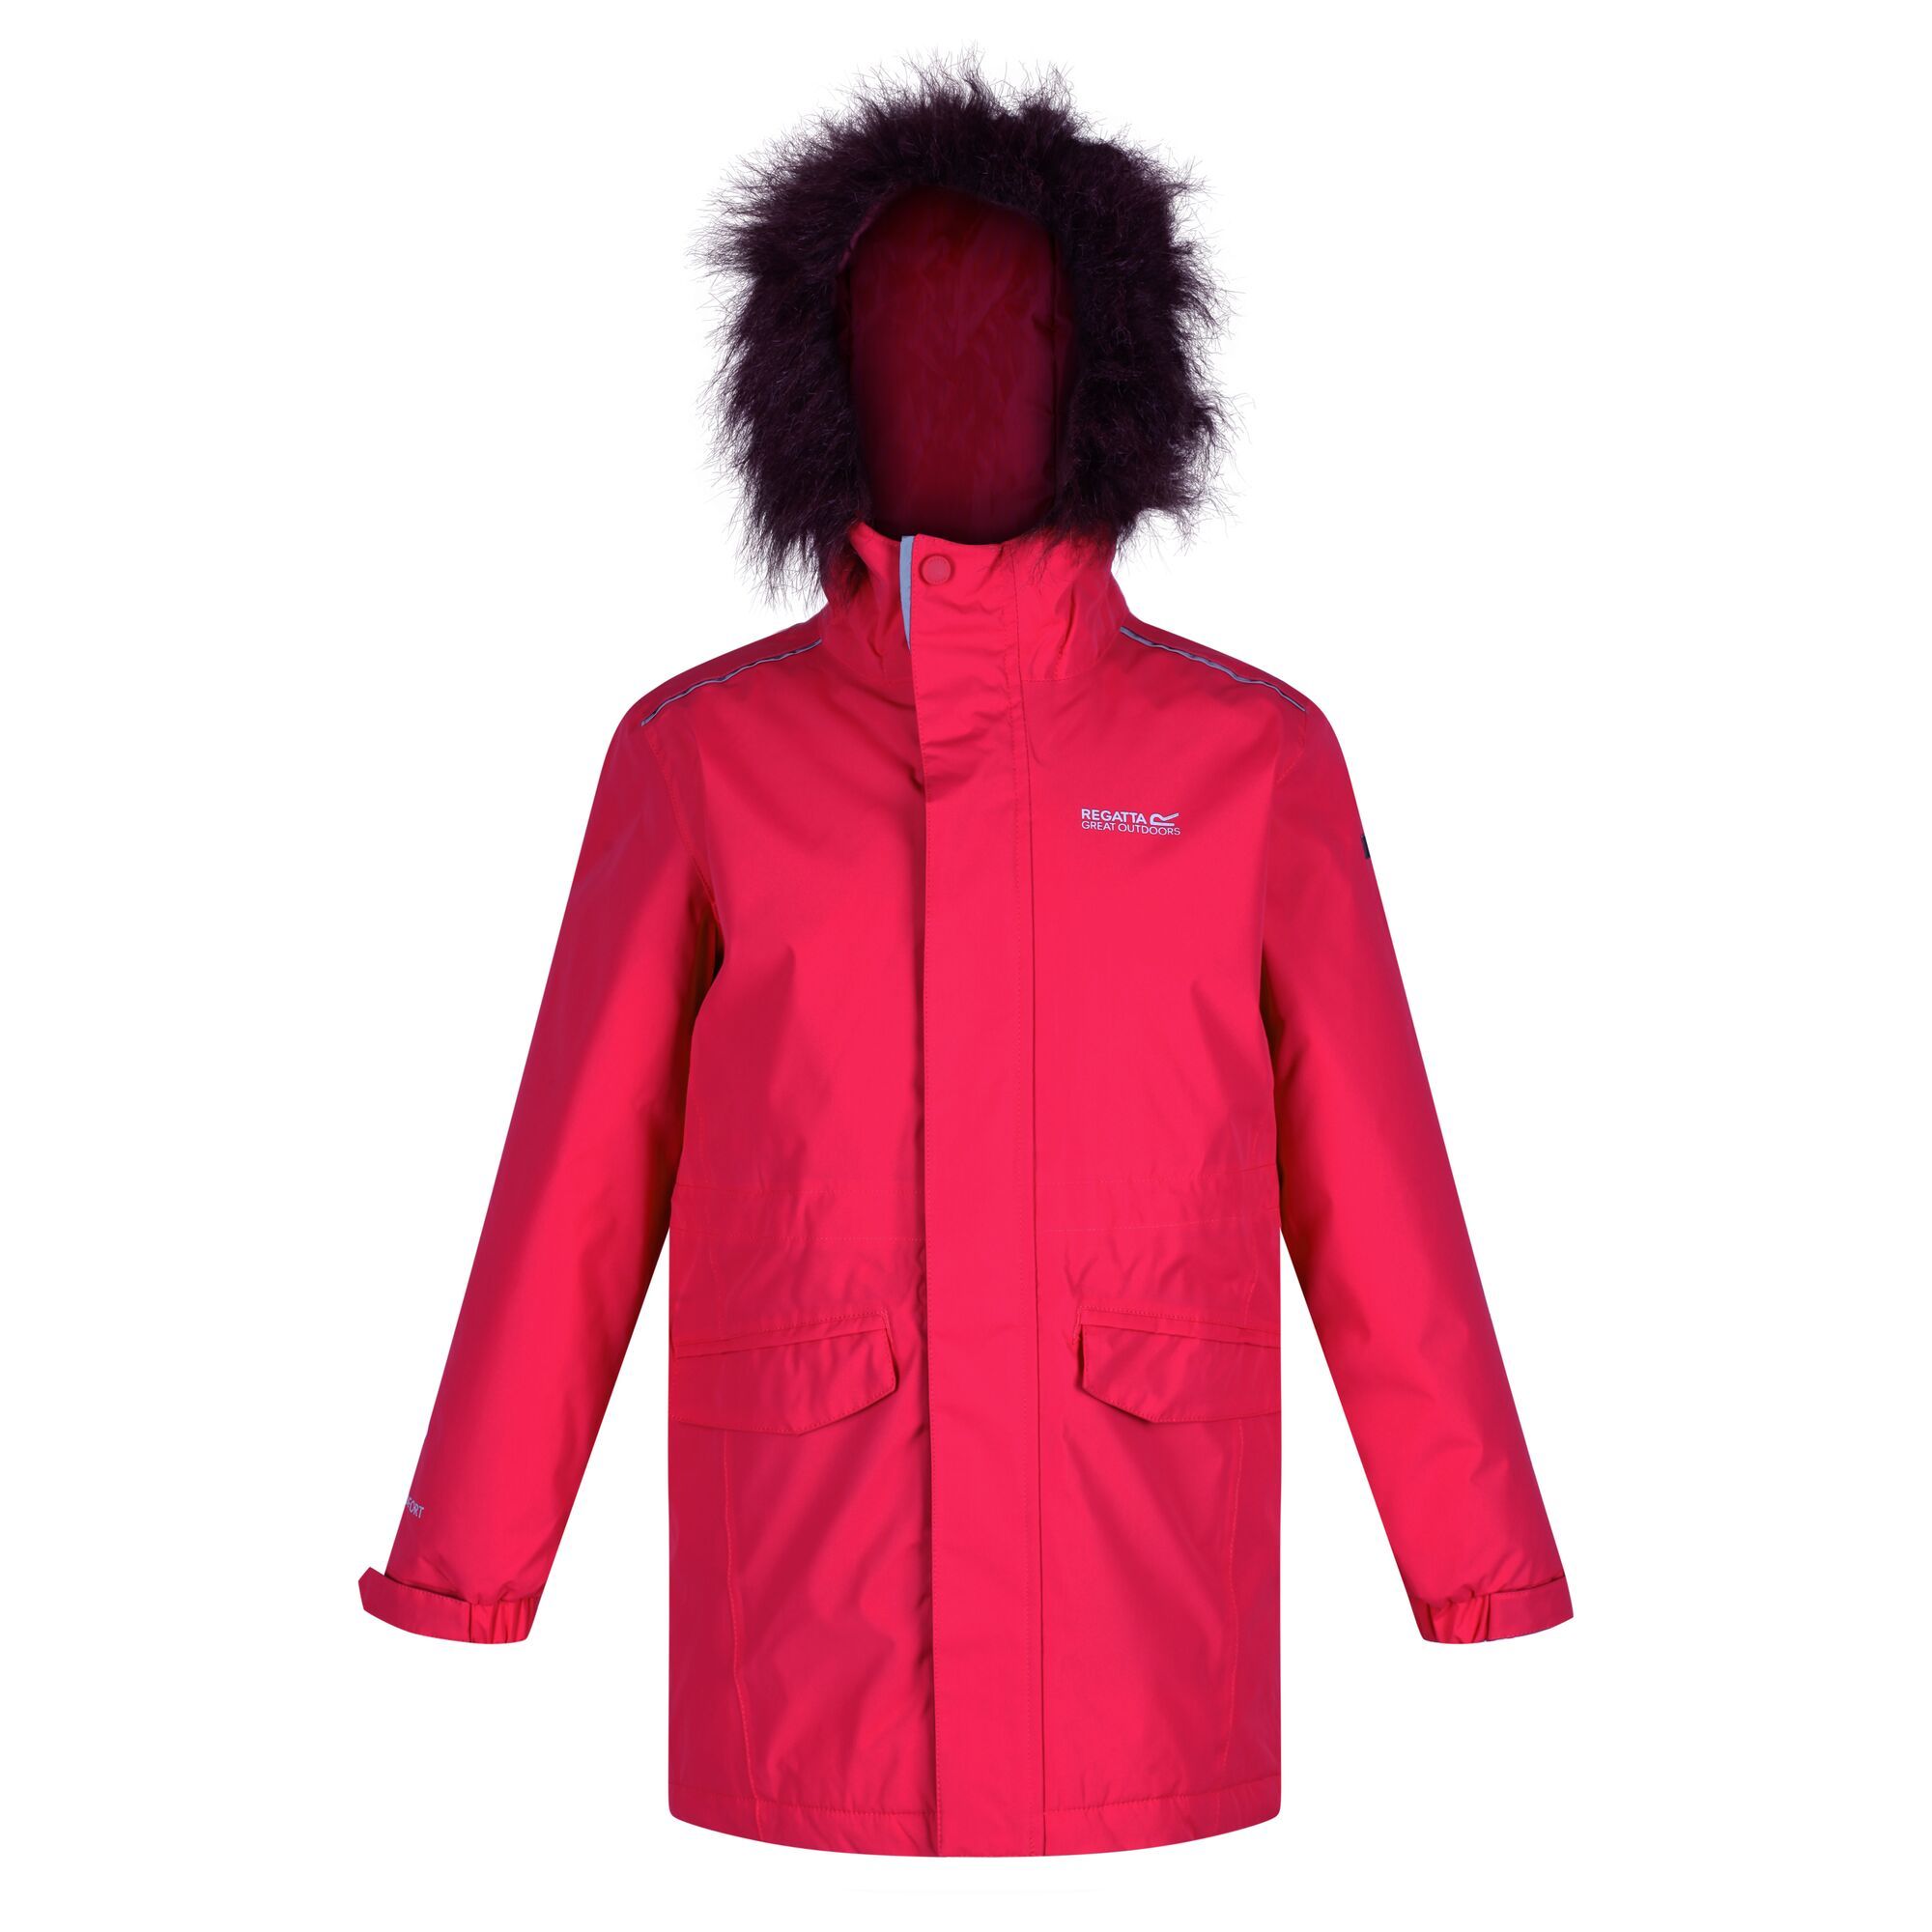 Made from Isotex 5000 coated polyester peached fabric with a 100% polyester taffeta lining. Waterproof and breathable fabric with a water repellent finish. Taped seams. Thermoguard insulation. Features include a faux fur trimmed hood, zip and stormflap fastening and cosy handwarmer pockets on the side. Elasticated and adjustable cuffs. 2 Lower handwarmer pockets. Adjustable drawcord hem. With reflective trim and the Regatta Outdoors badge on the left sleeve. Size (height/chest): (2 Years) 92cm/53-55cm, (3-4 Years) 98-104cm/55-57cm, (5-6 Years) 110-116cm/59-61cm, (7-8 Years) 122-128cm/63-67cm, (9-10 Years) 135-140cm/69-73cm, (11-12 Years) 146-152cm/75-79cm, (13 Years) 153-158cm/82cm, (14 Years) 164-170cm/86cm, (15-16 Years) 170-176cm/89-92cm.